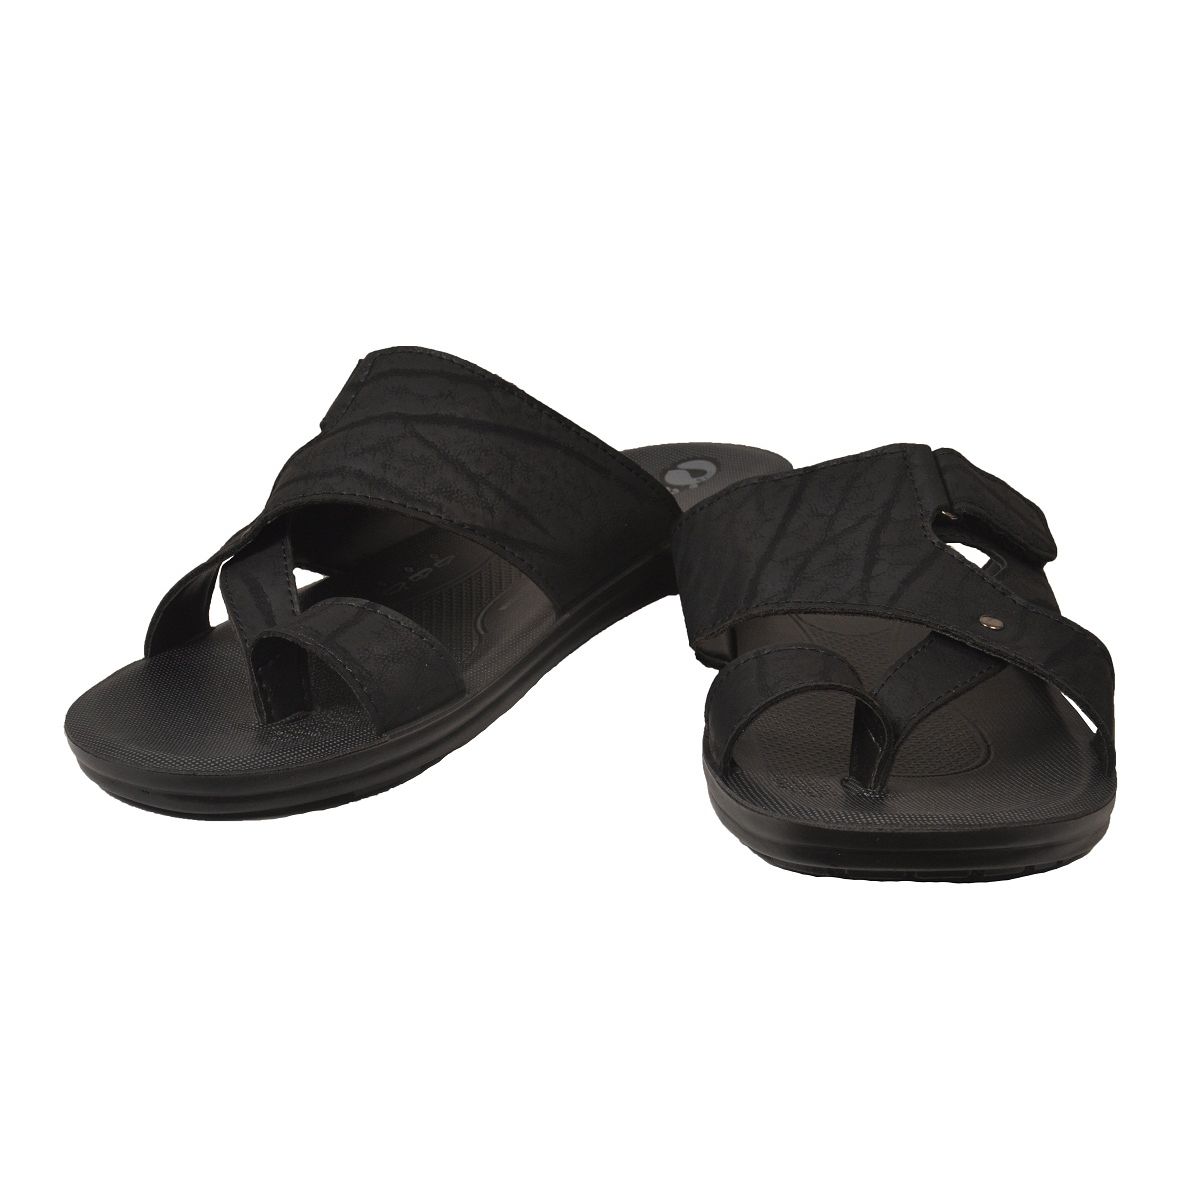 Buy Casual Black Chappal from the house of at Lowest Price ...